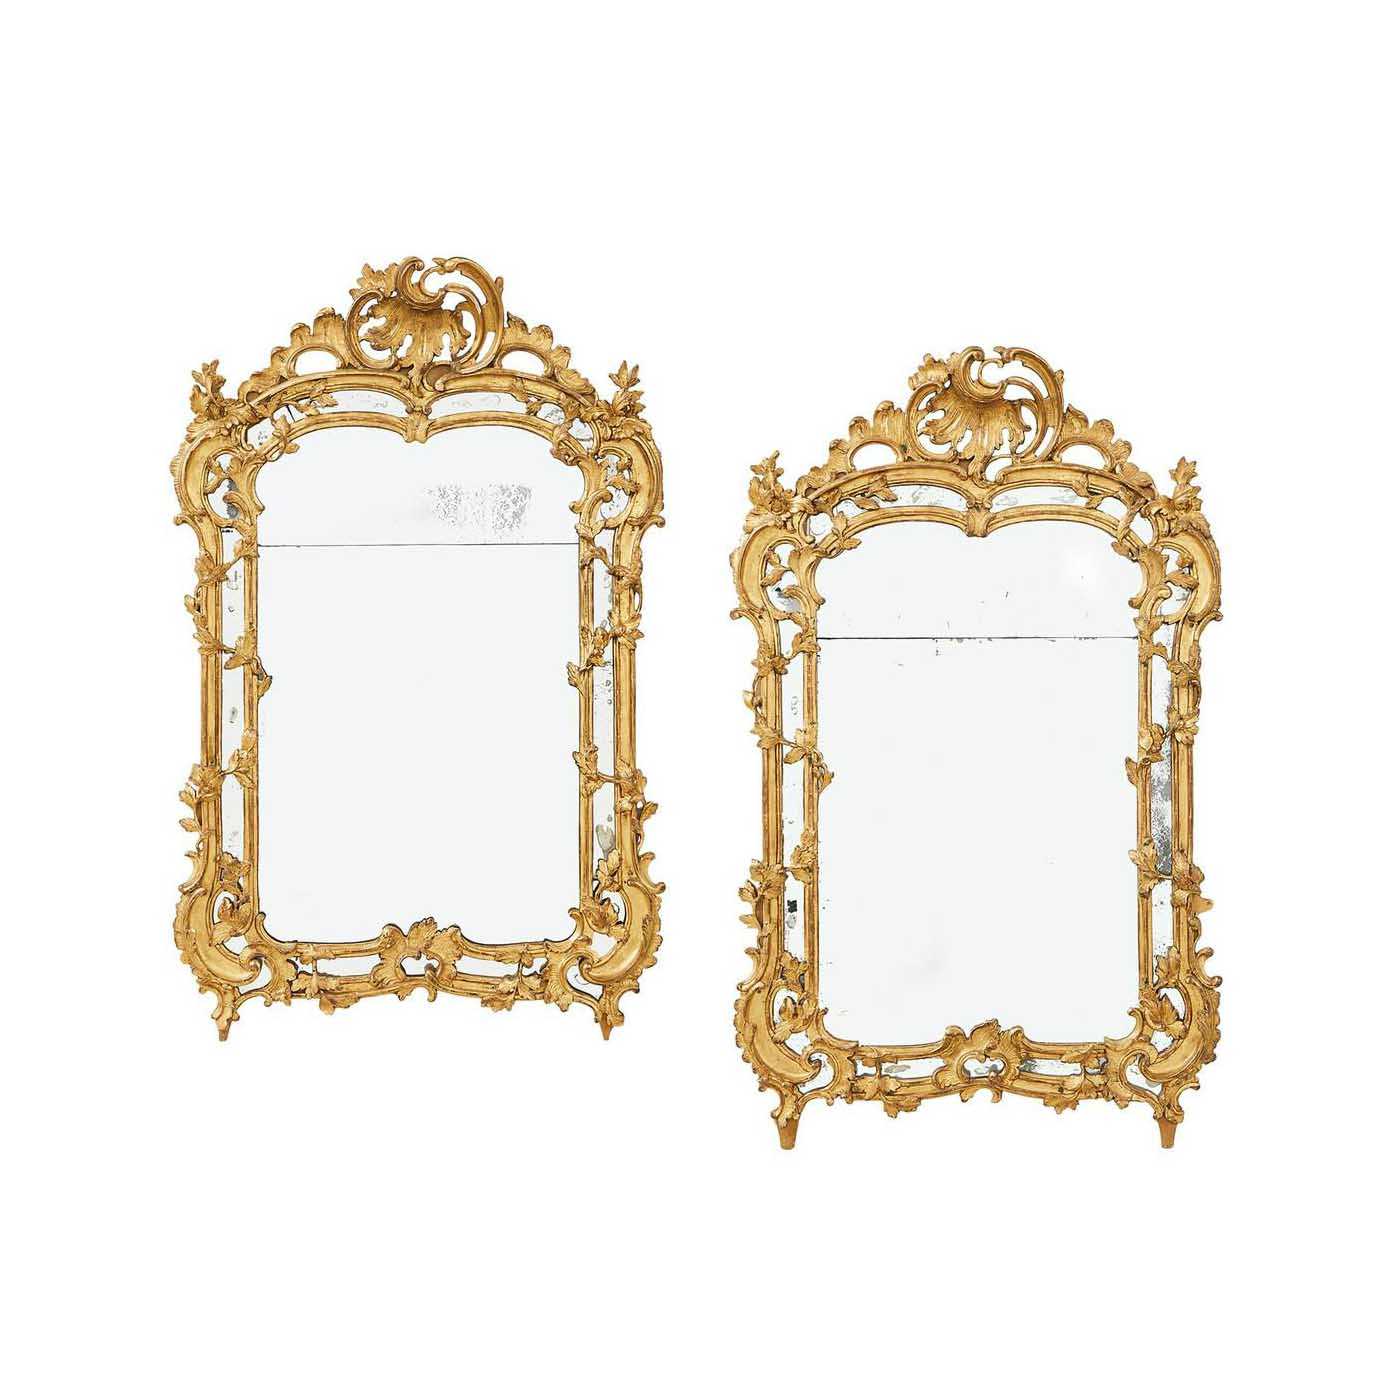 Pair of Louis XV giltwood mirrors dating to the third quarter of the 18th century, which sold for $18,000 plus the buyer’s premium in December 2022. Image courtesy of New Orleans Auction Galleries and LiveAuctioneers.